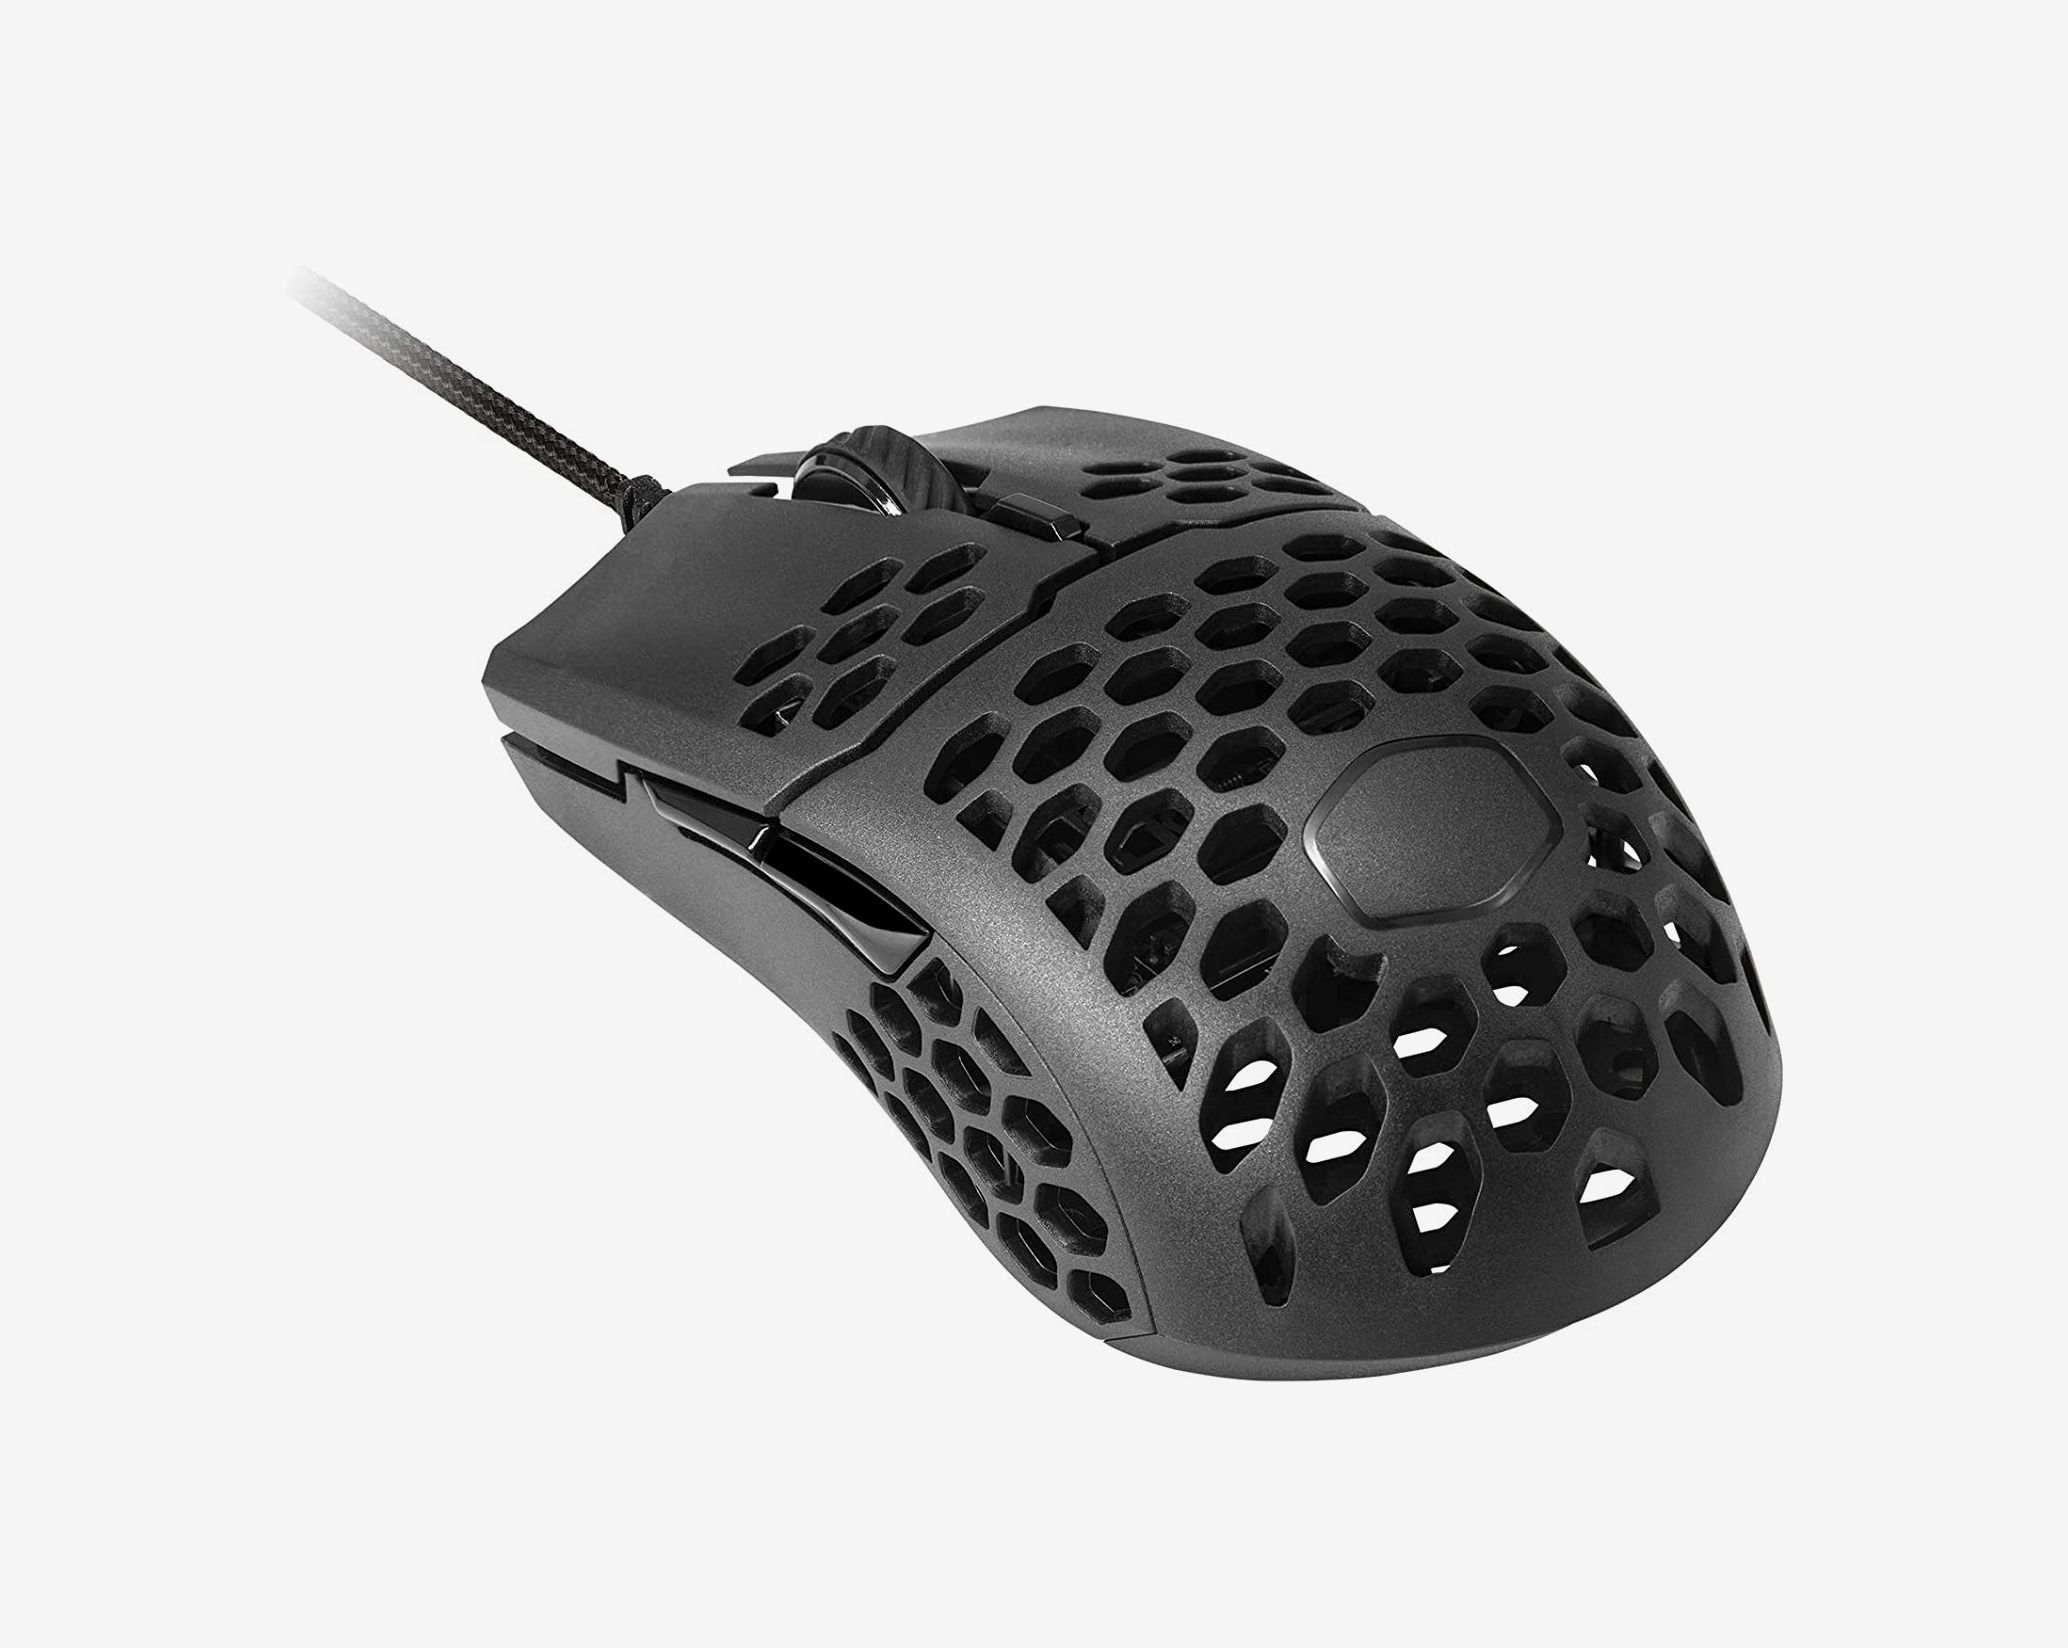 8 Best Gaming Mouses 21 The Strategist New York Magazine